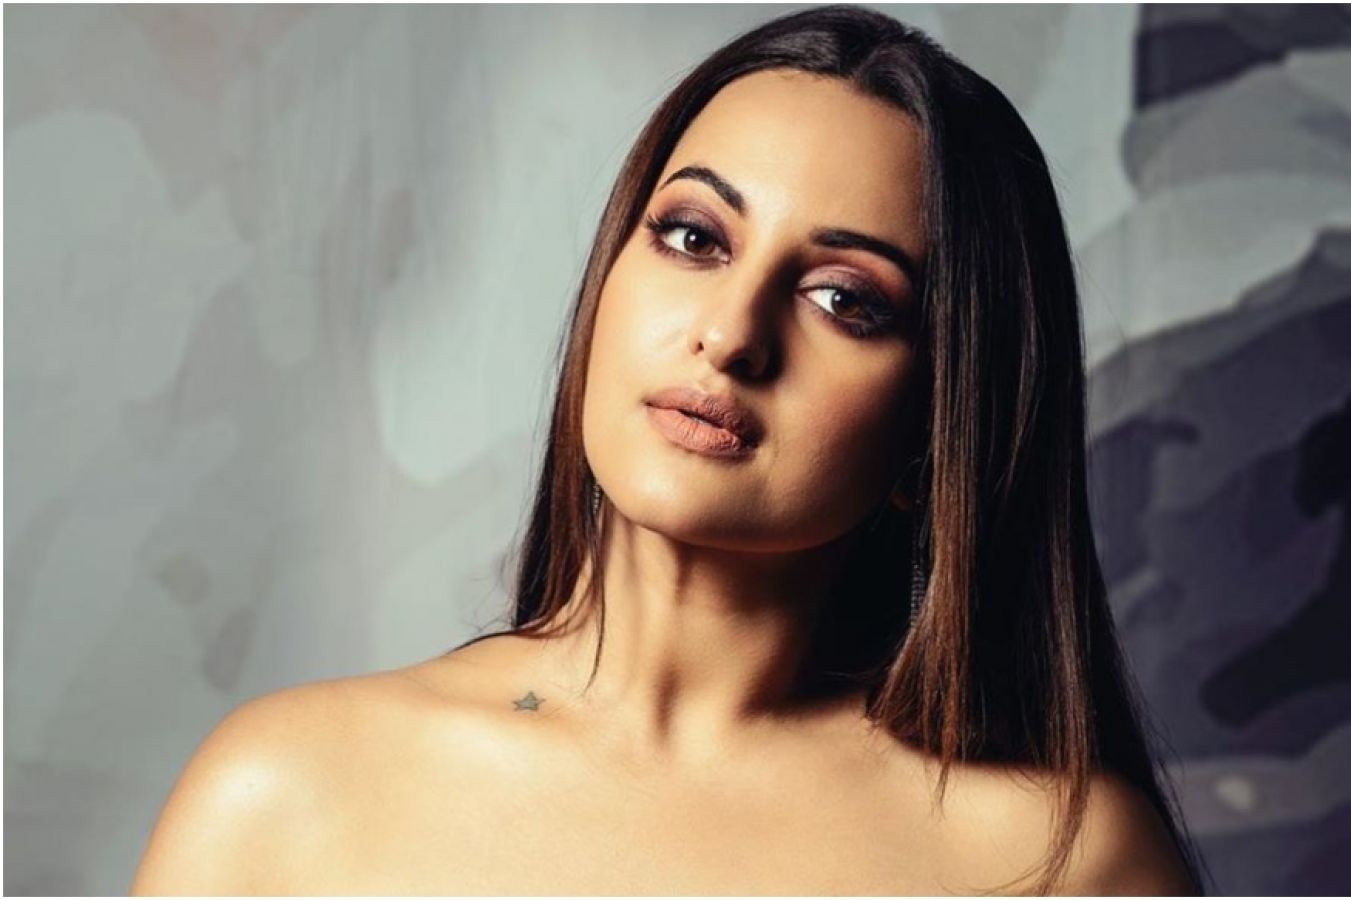 Sonakshi Sinha Ki Sexx Video - Sonakshi Sinha's is mix of sexy and sassy in golden dress, watch video here  | NewsTrack English 1